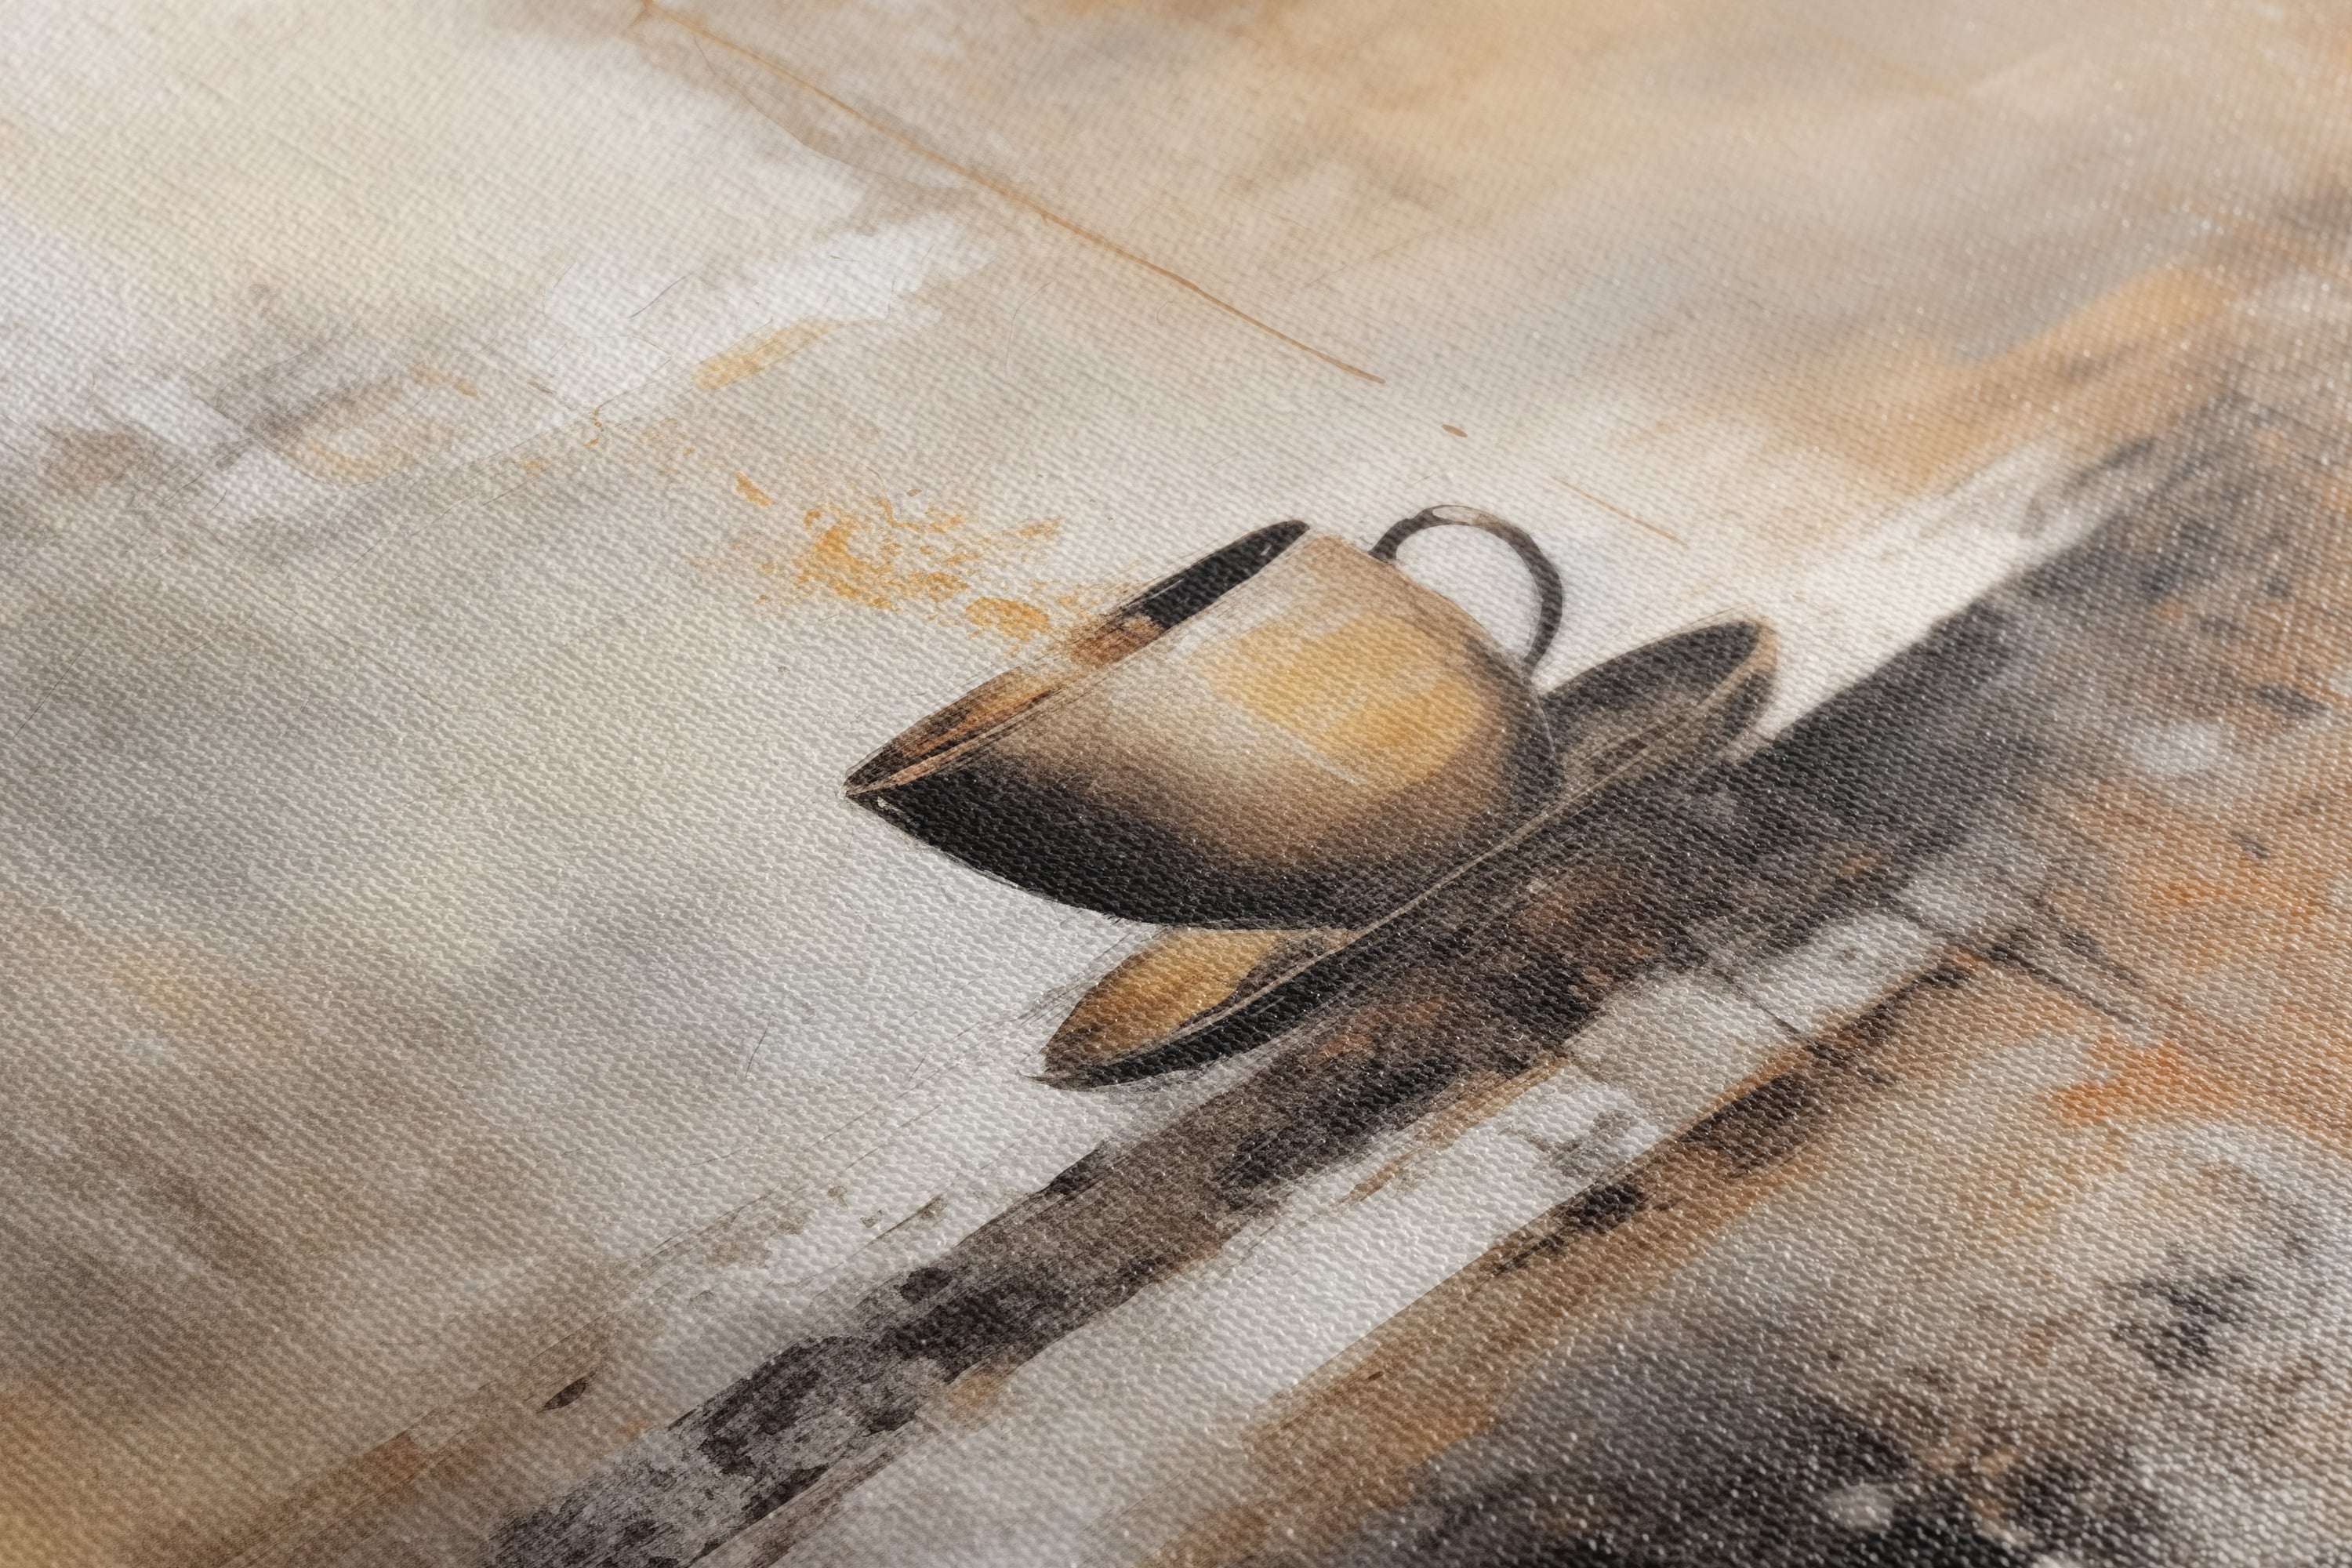 Steaming Coffee Cup on Warm Earthy Tones - Canvas Print - Artoholica Ready to Hang Canvas Print